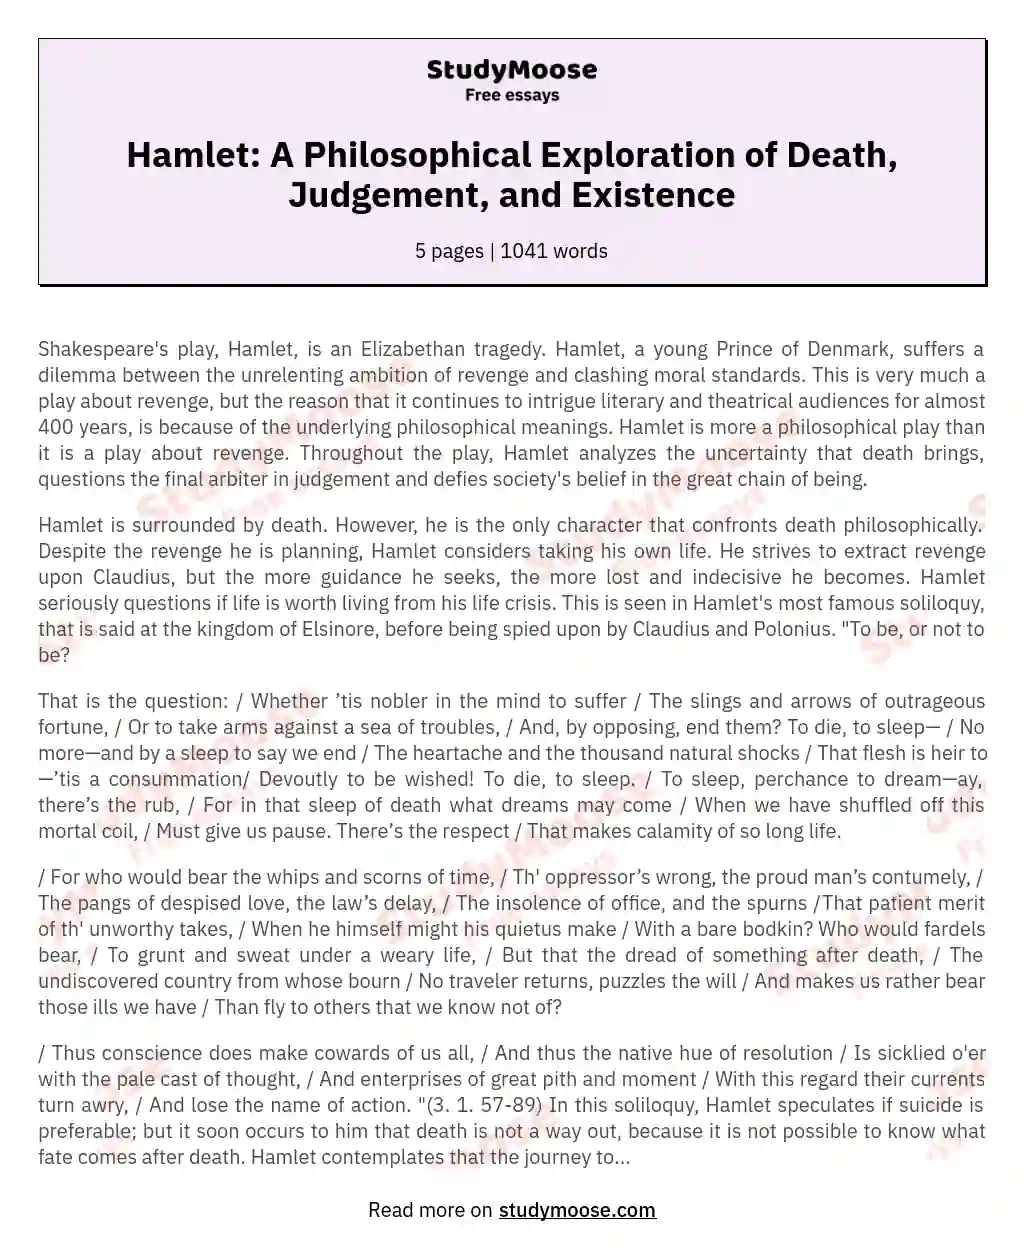 Hamlet: A Philosophical Exploration of Death, Judgement, and Existence essay